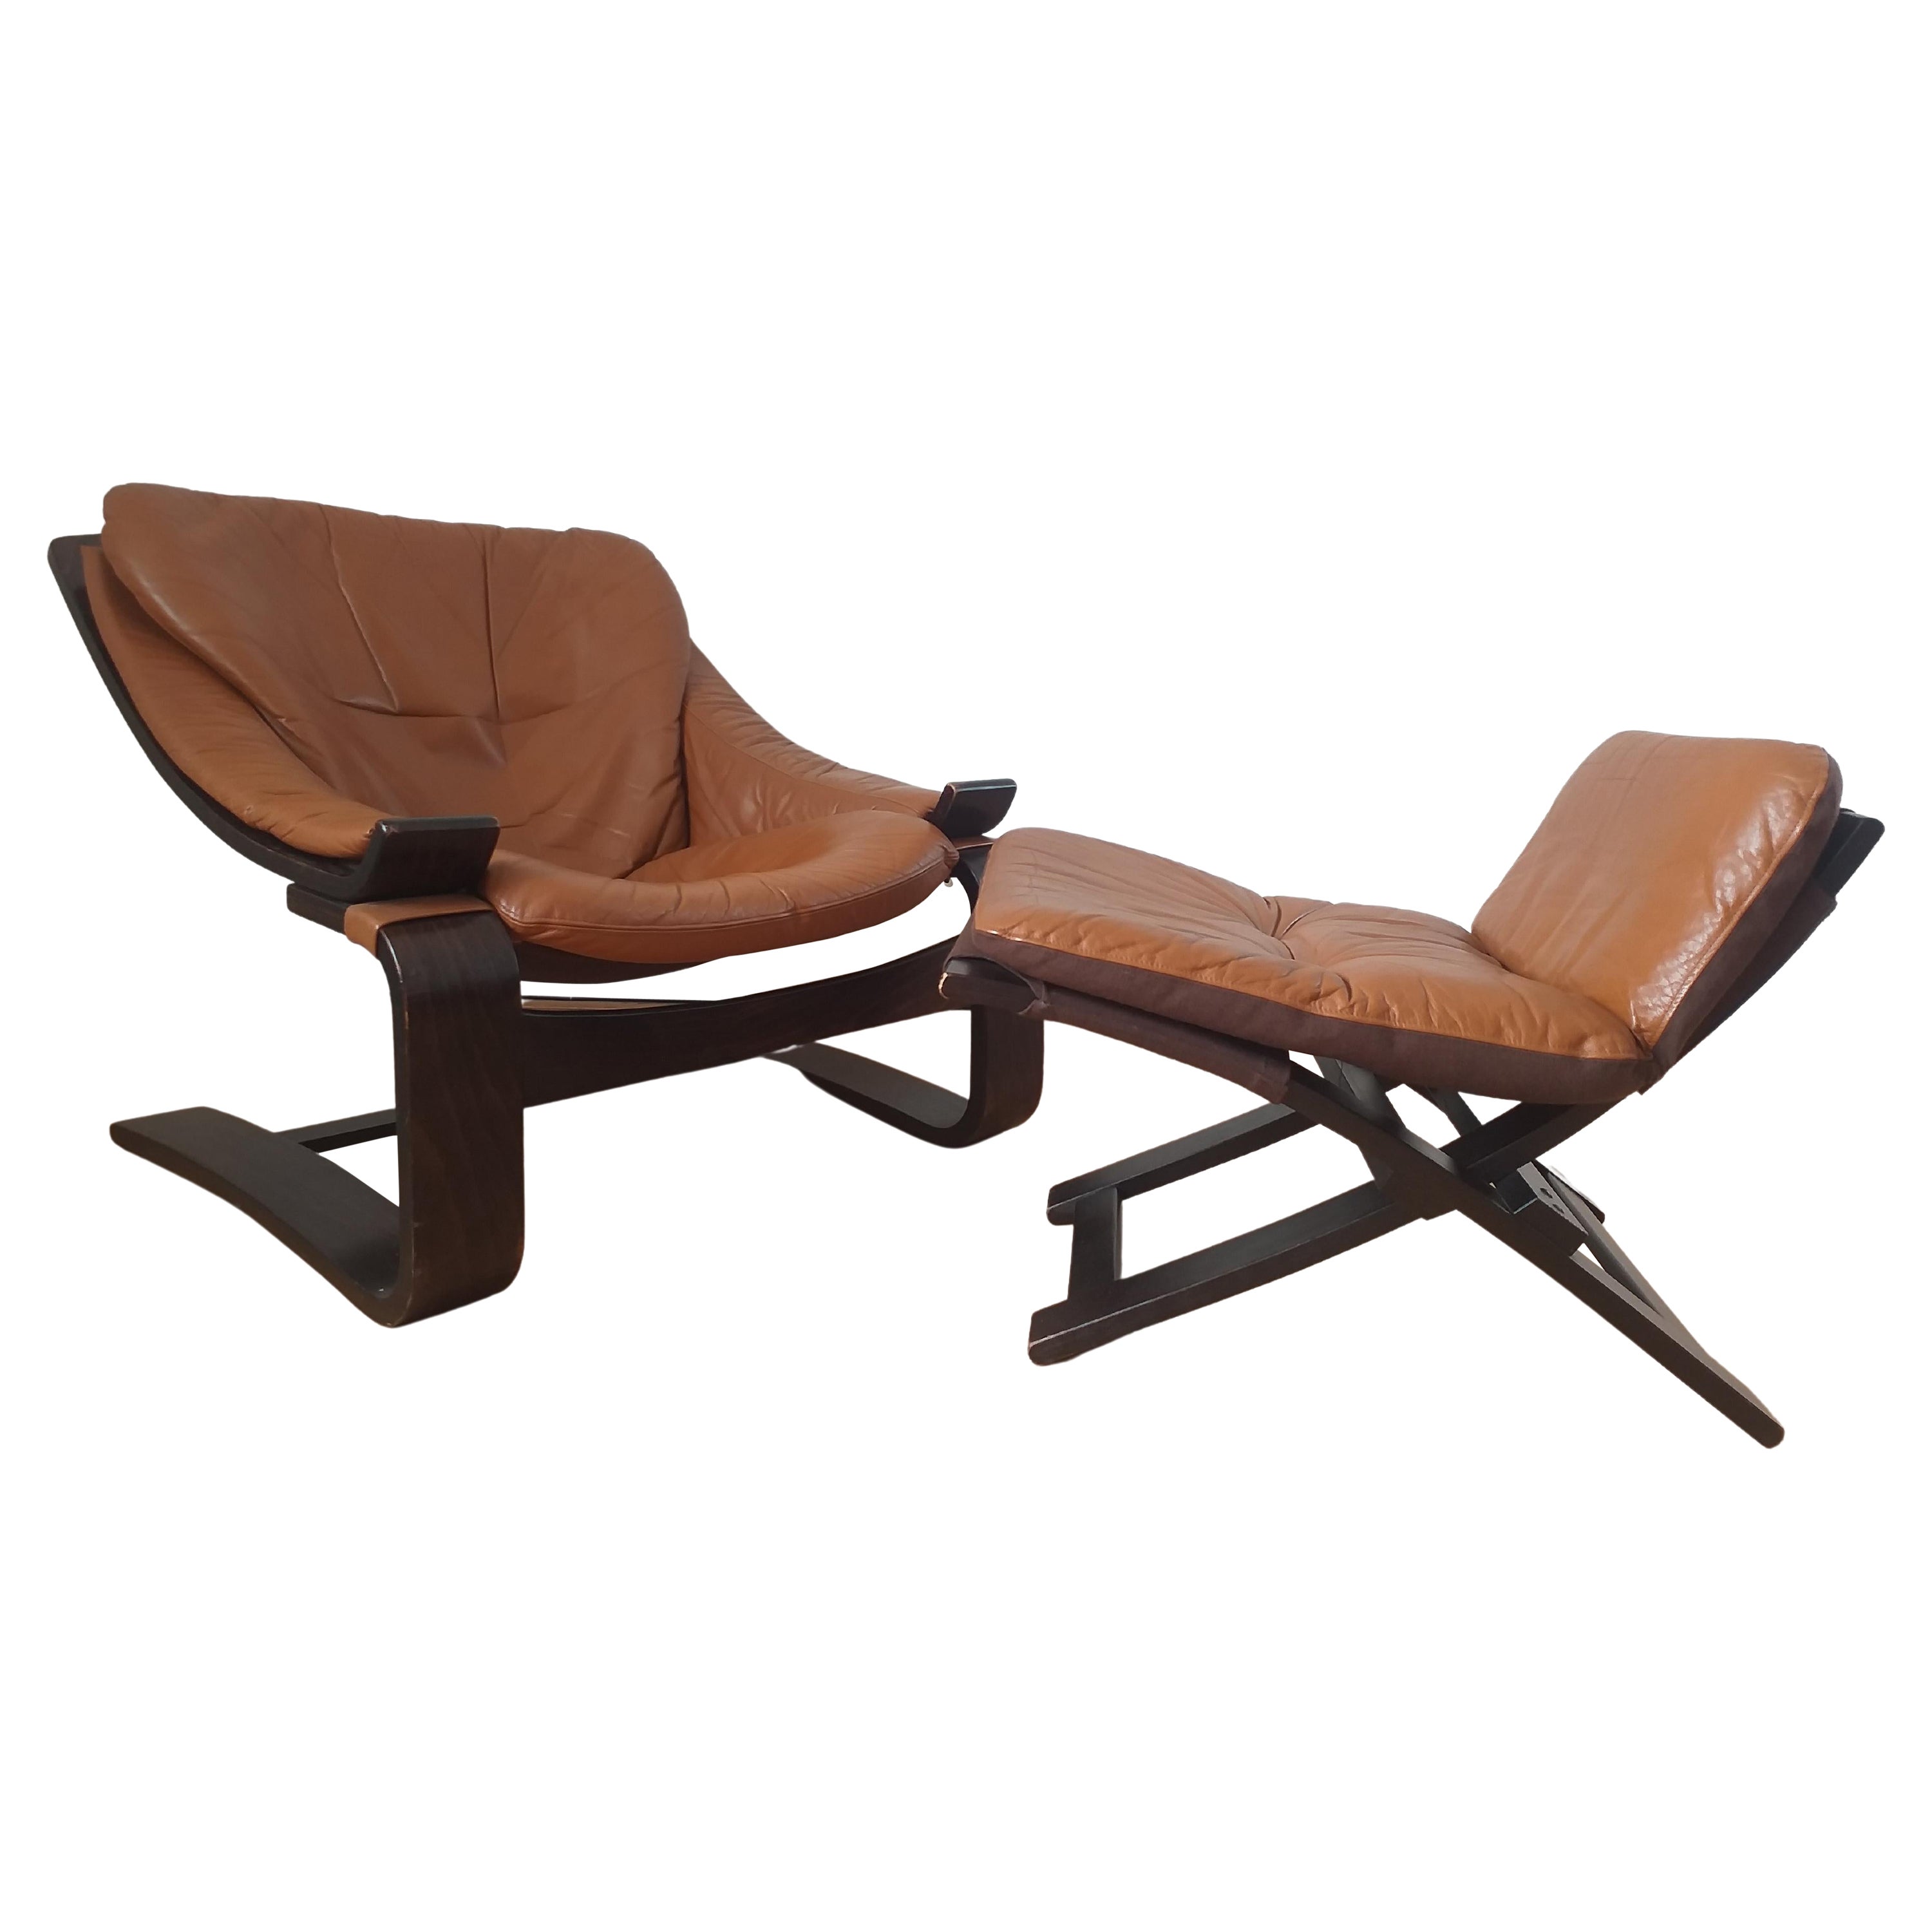 Midcentury Lounge Chair Kroken with Ottoman, Ake Fribytter, Nelo, Sweden, 1970s